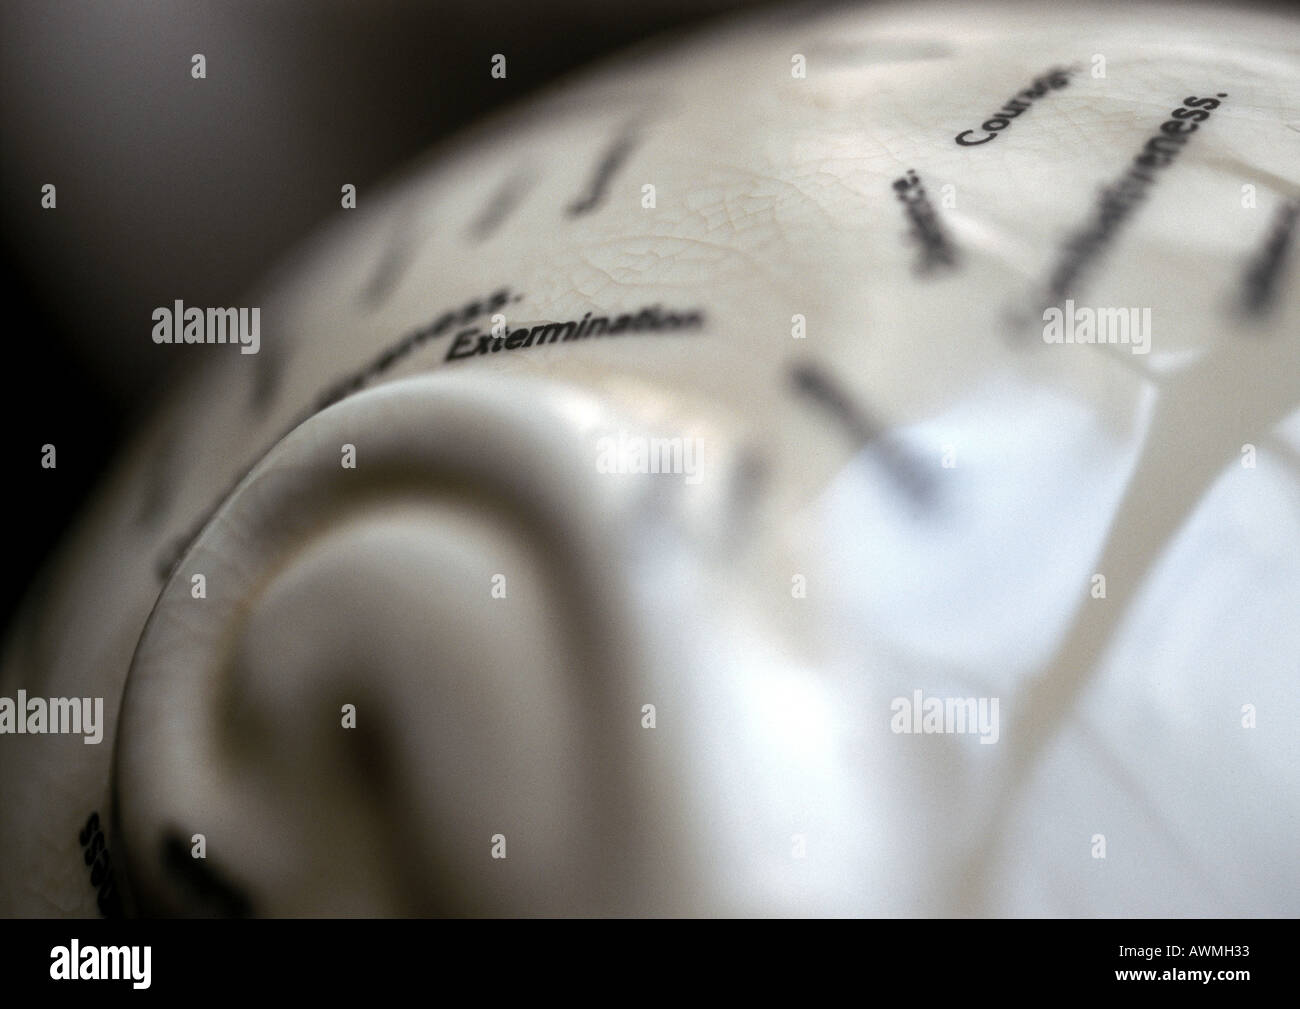 Words printed on curved surface Stock Photo